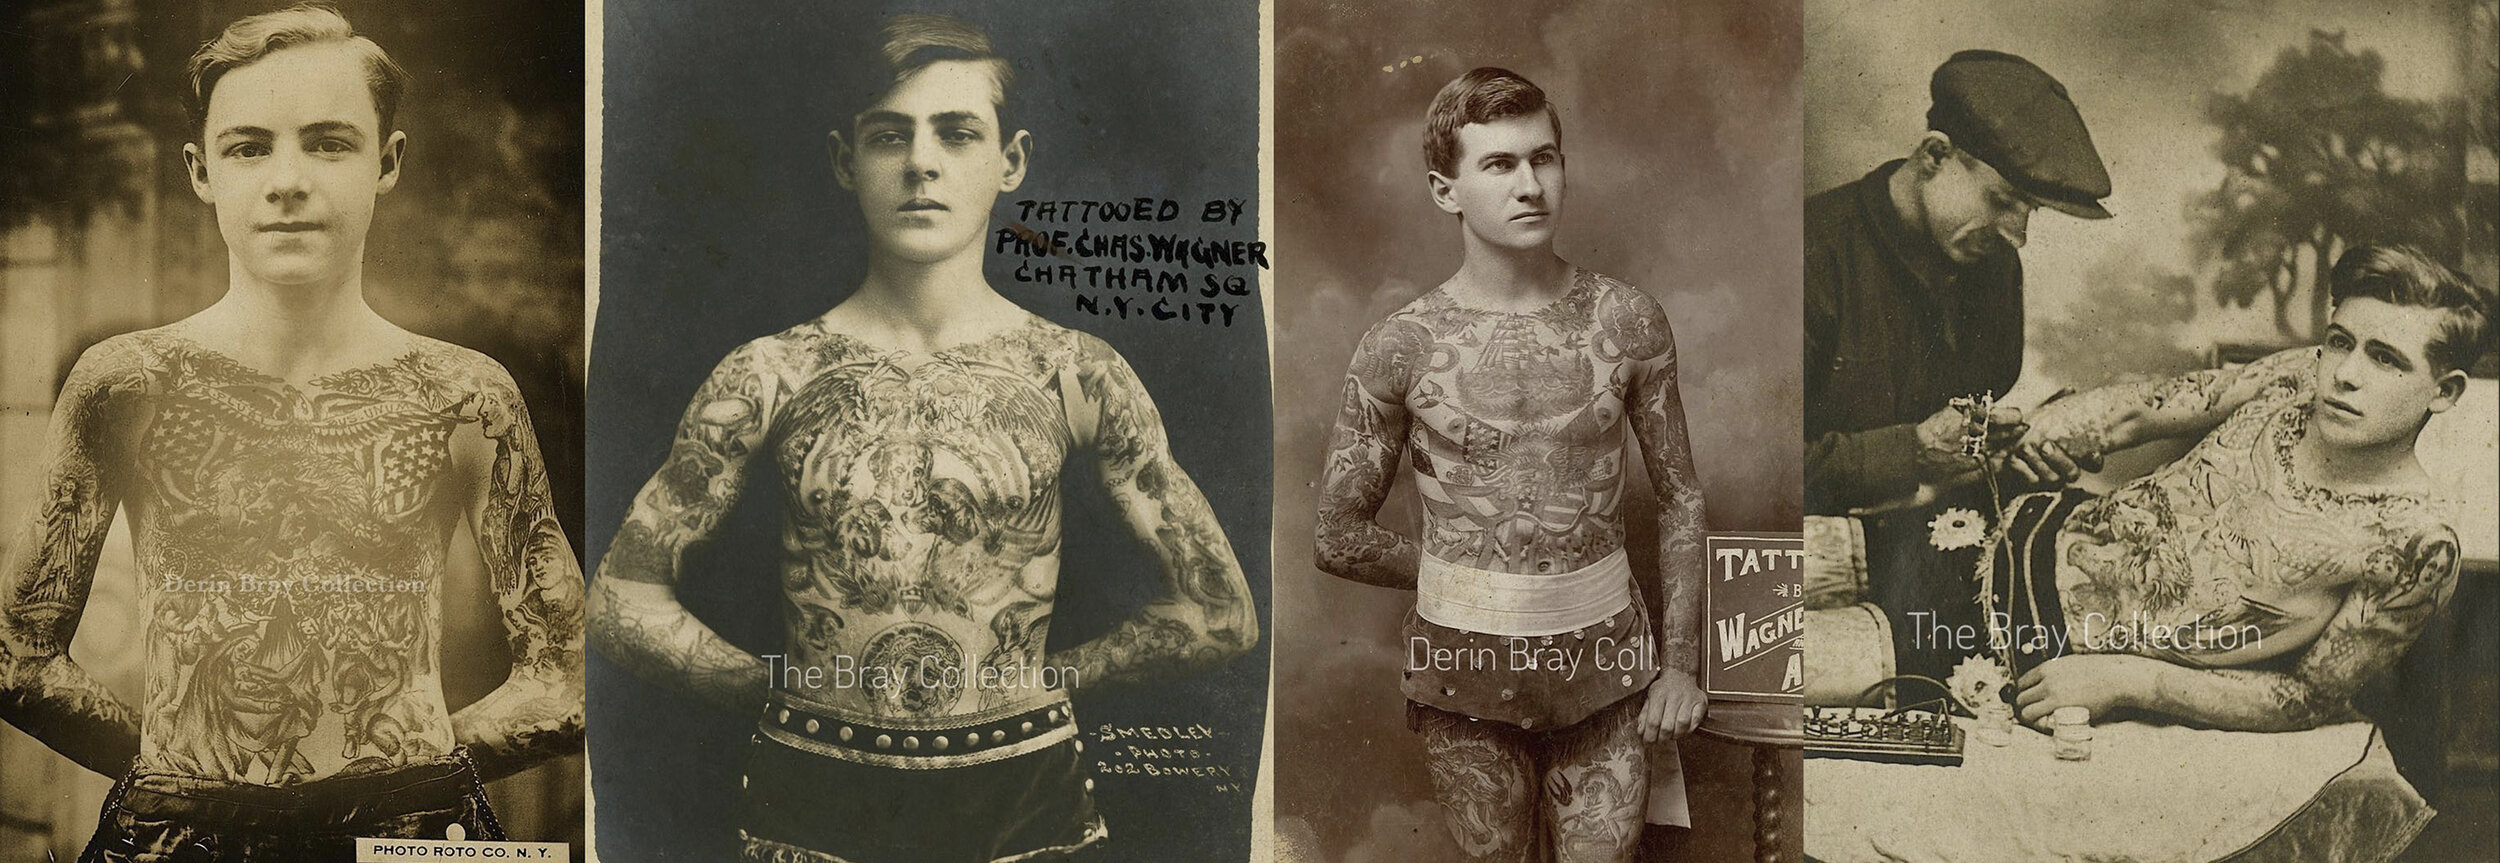 Charlie Wagner, King of Bowery Tattooers